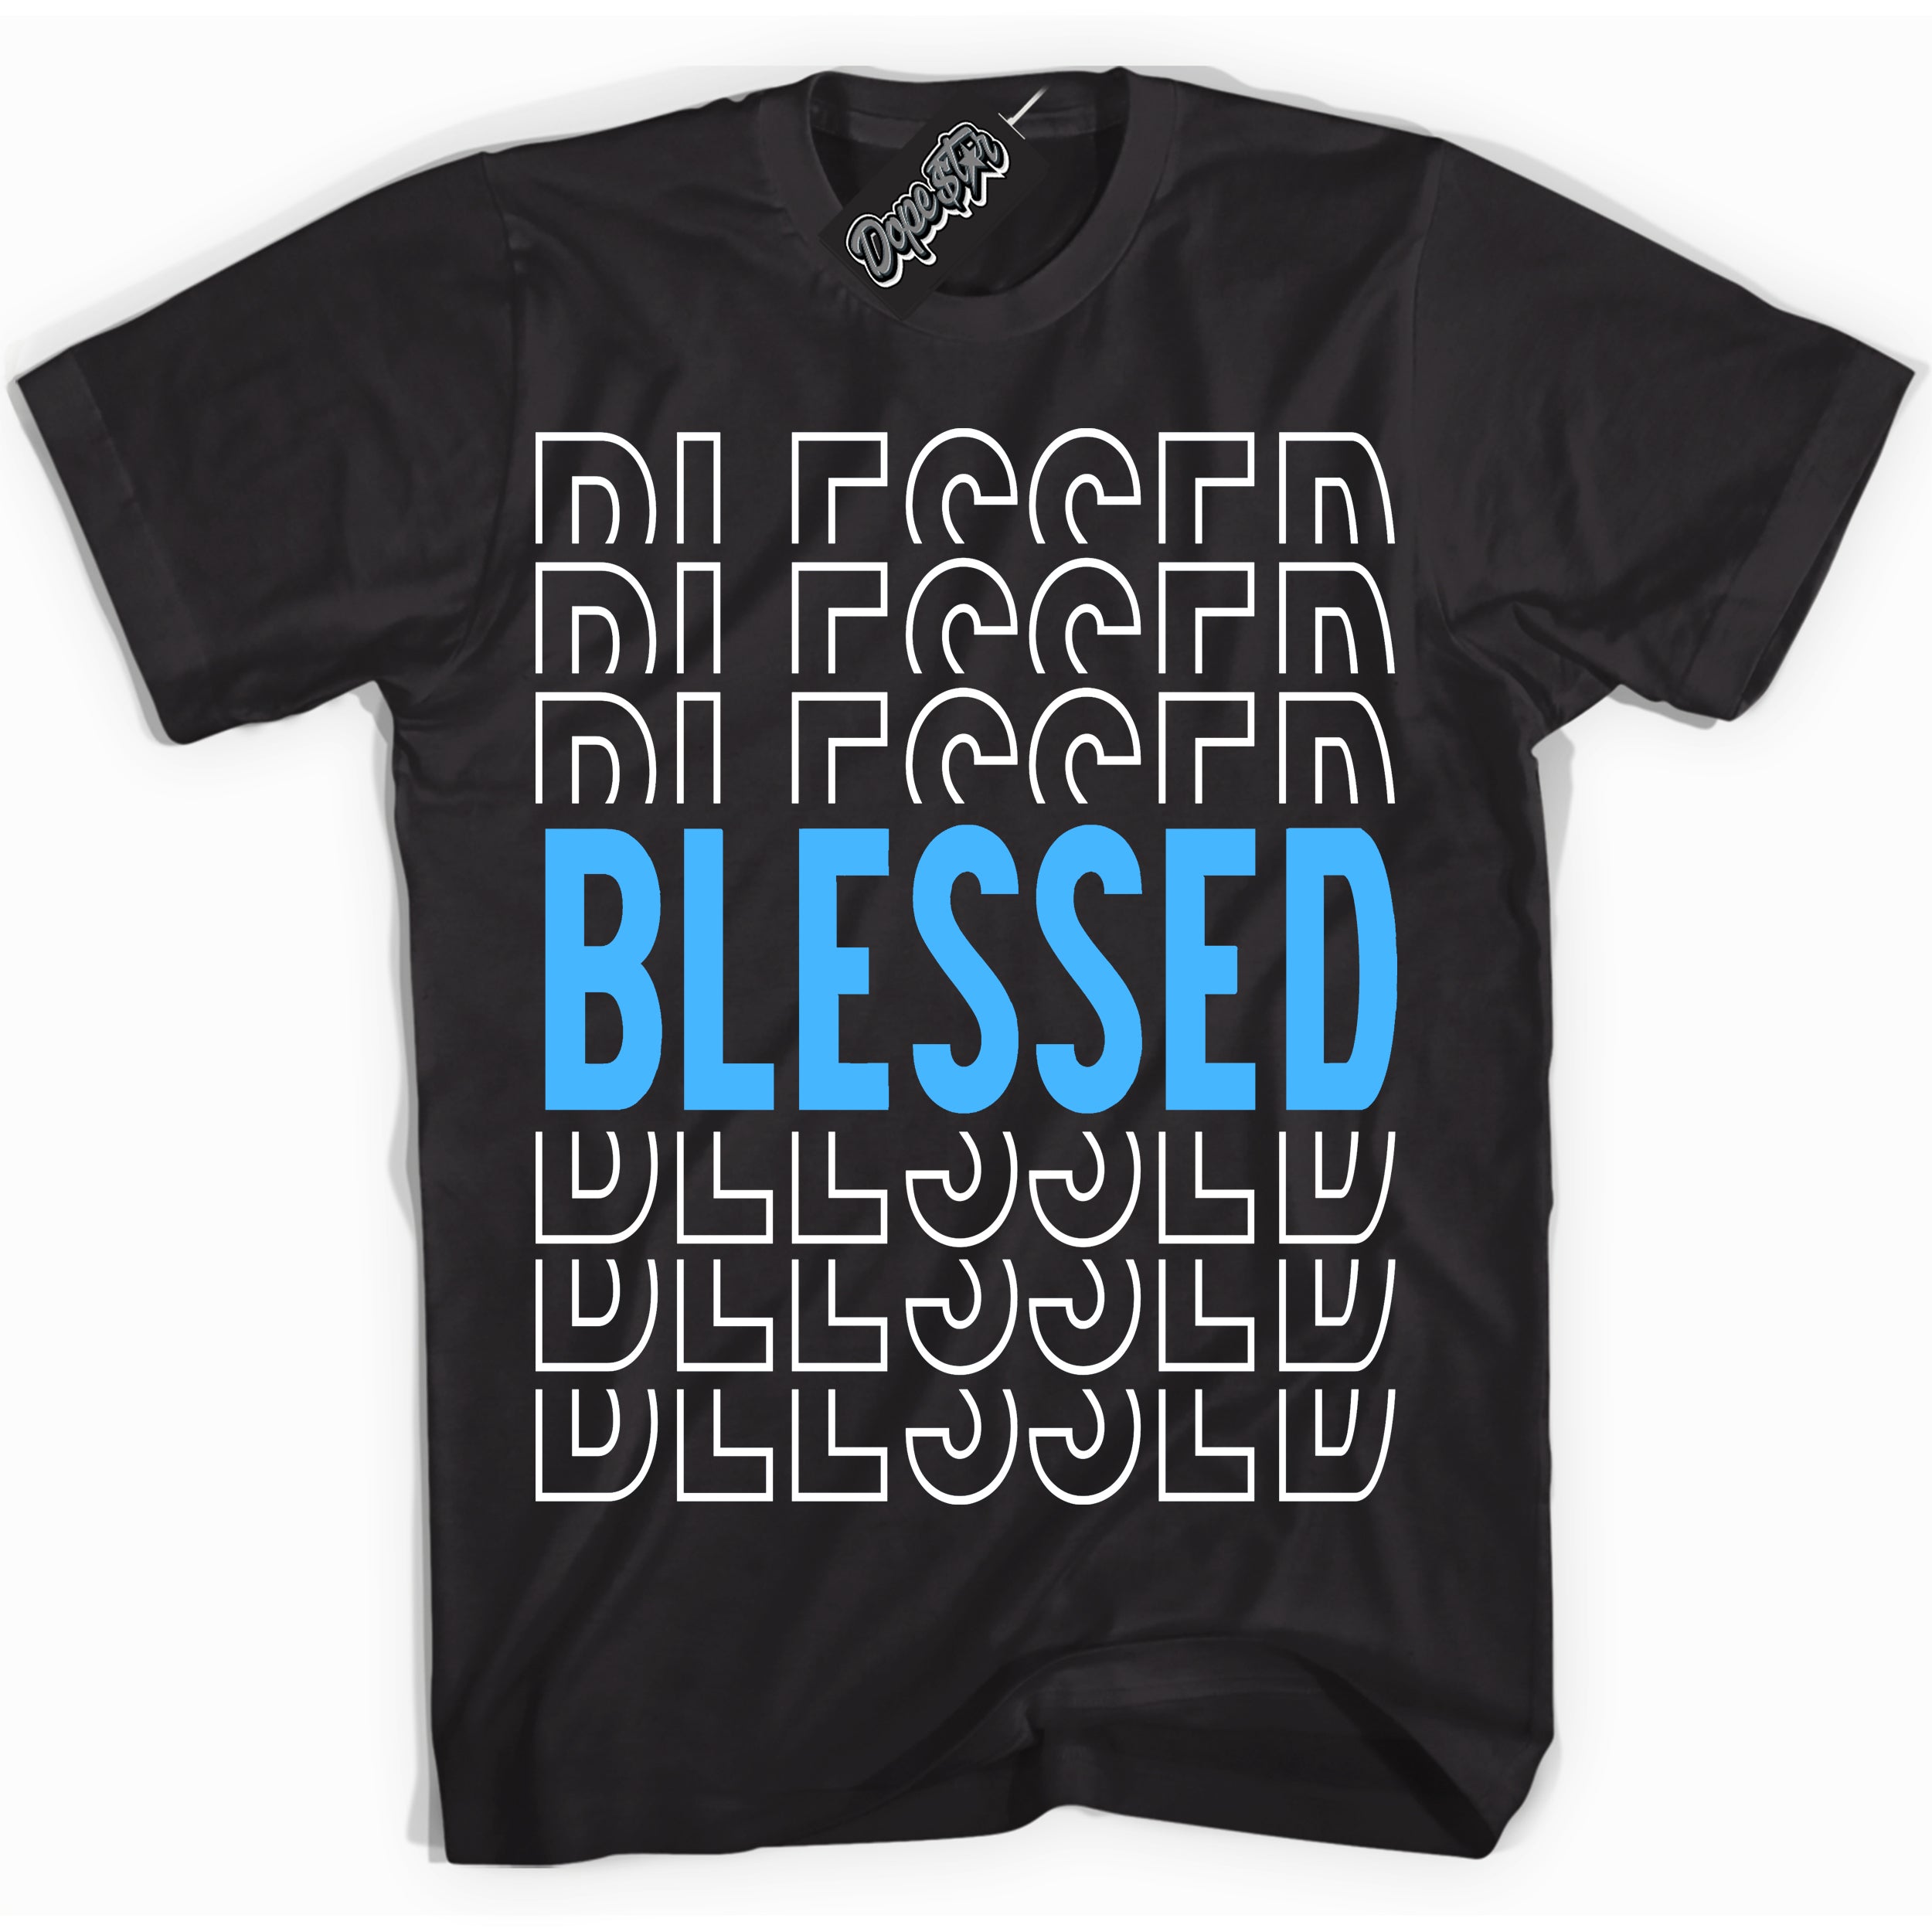 Cool Black graphic tee with “ Blessed Stacked ” design, that perfectly matches Powder Blue 9s sneakers 